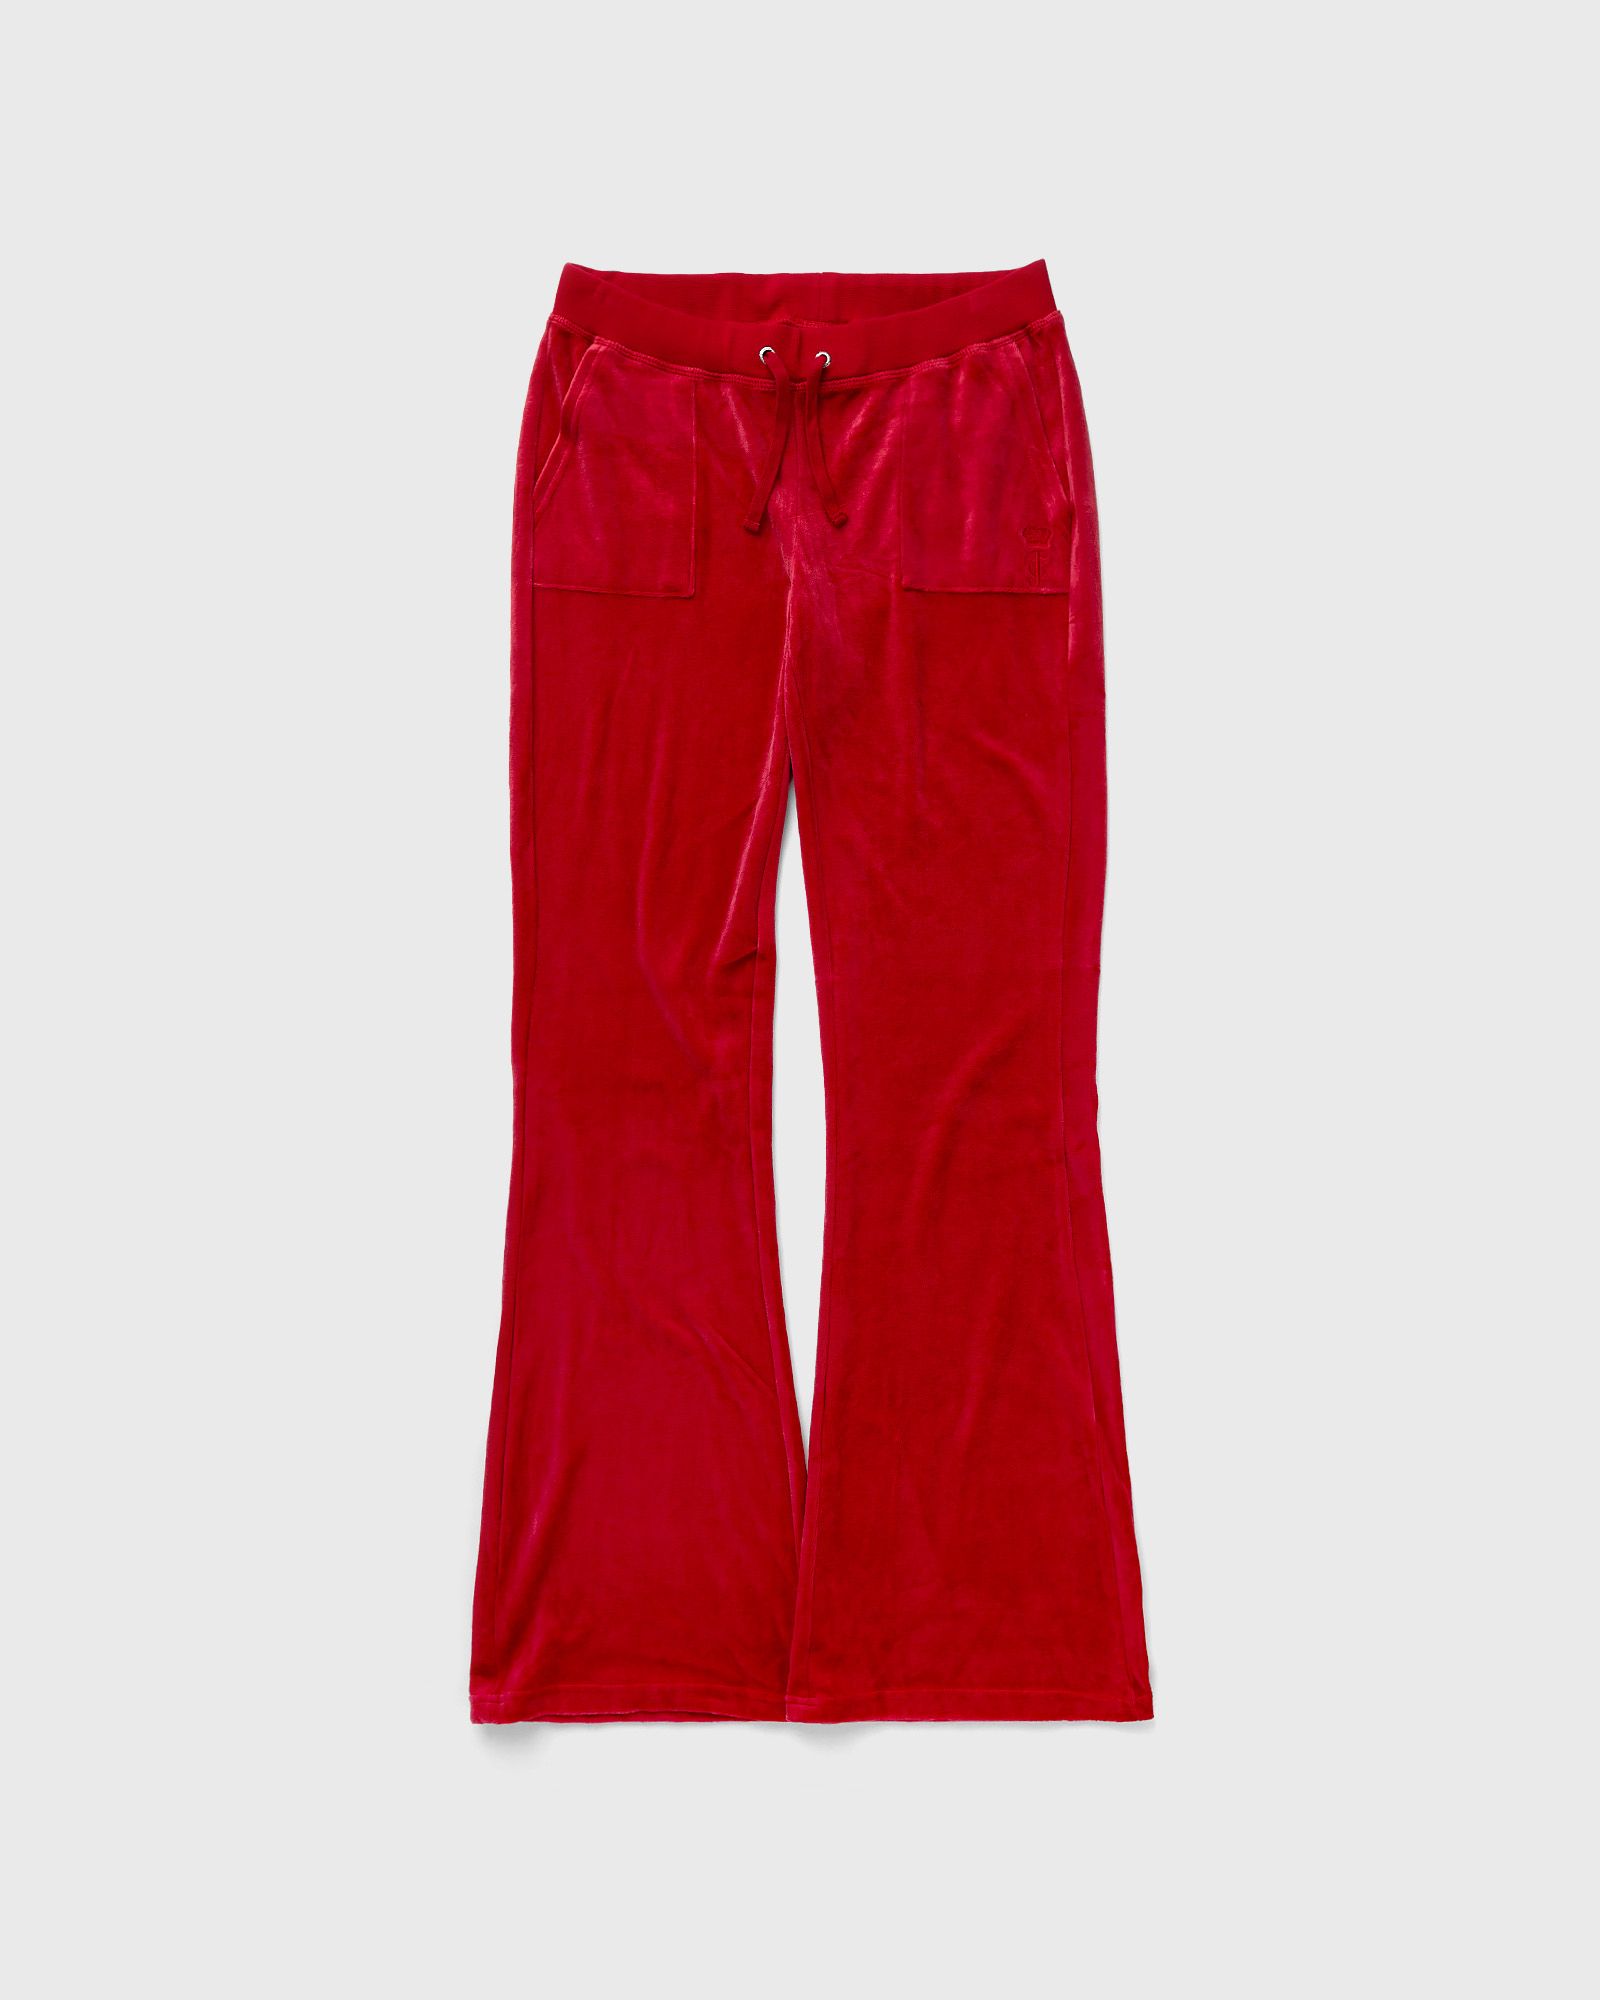 Juicy Couture - wmns caisa pant women sweatpants red in größe:s